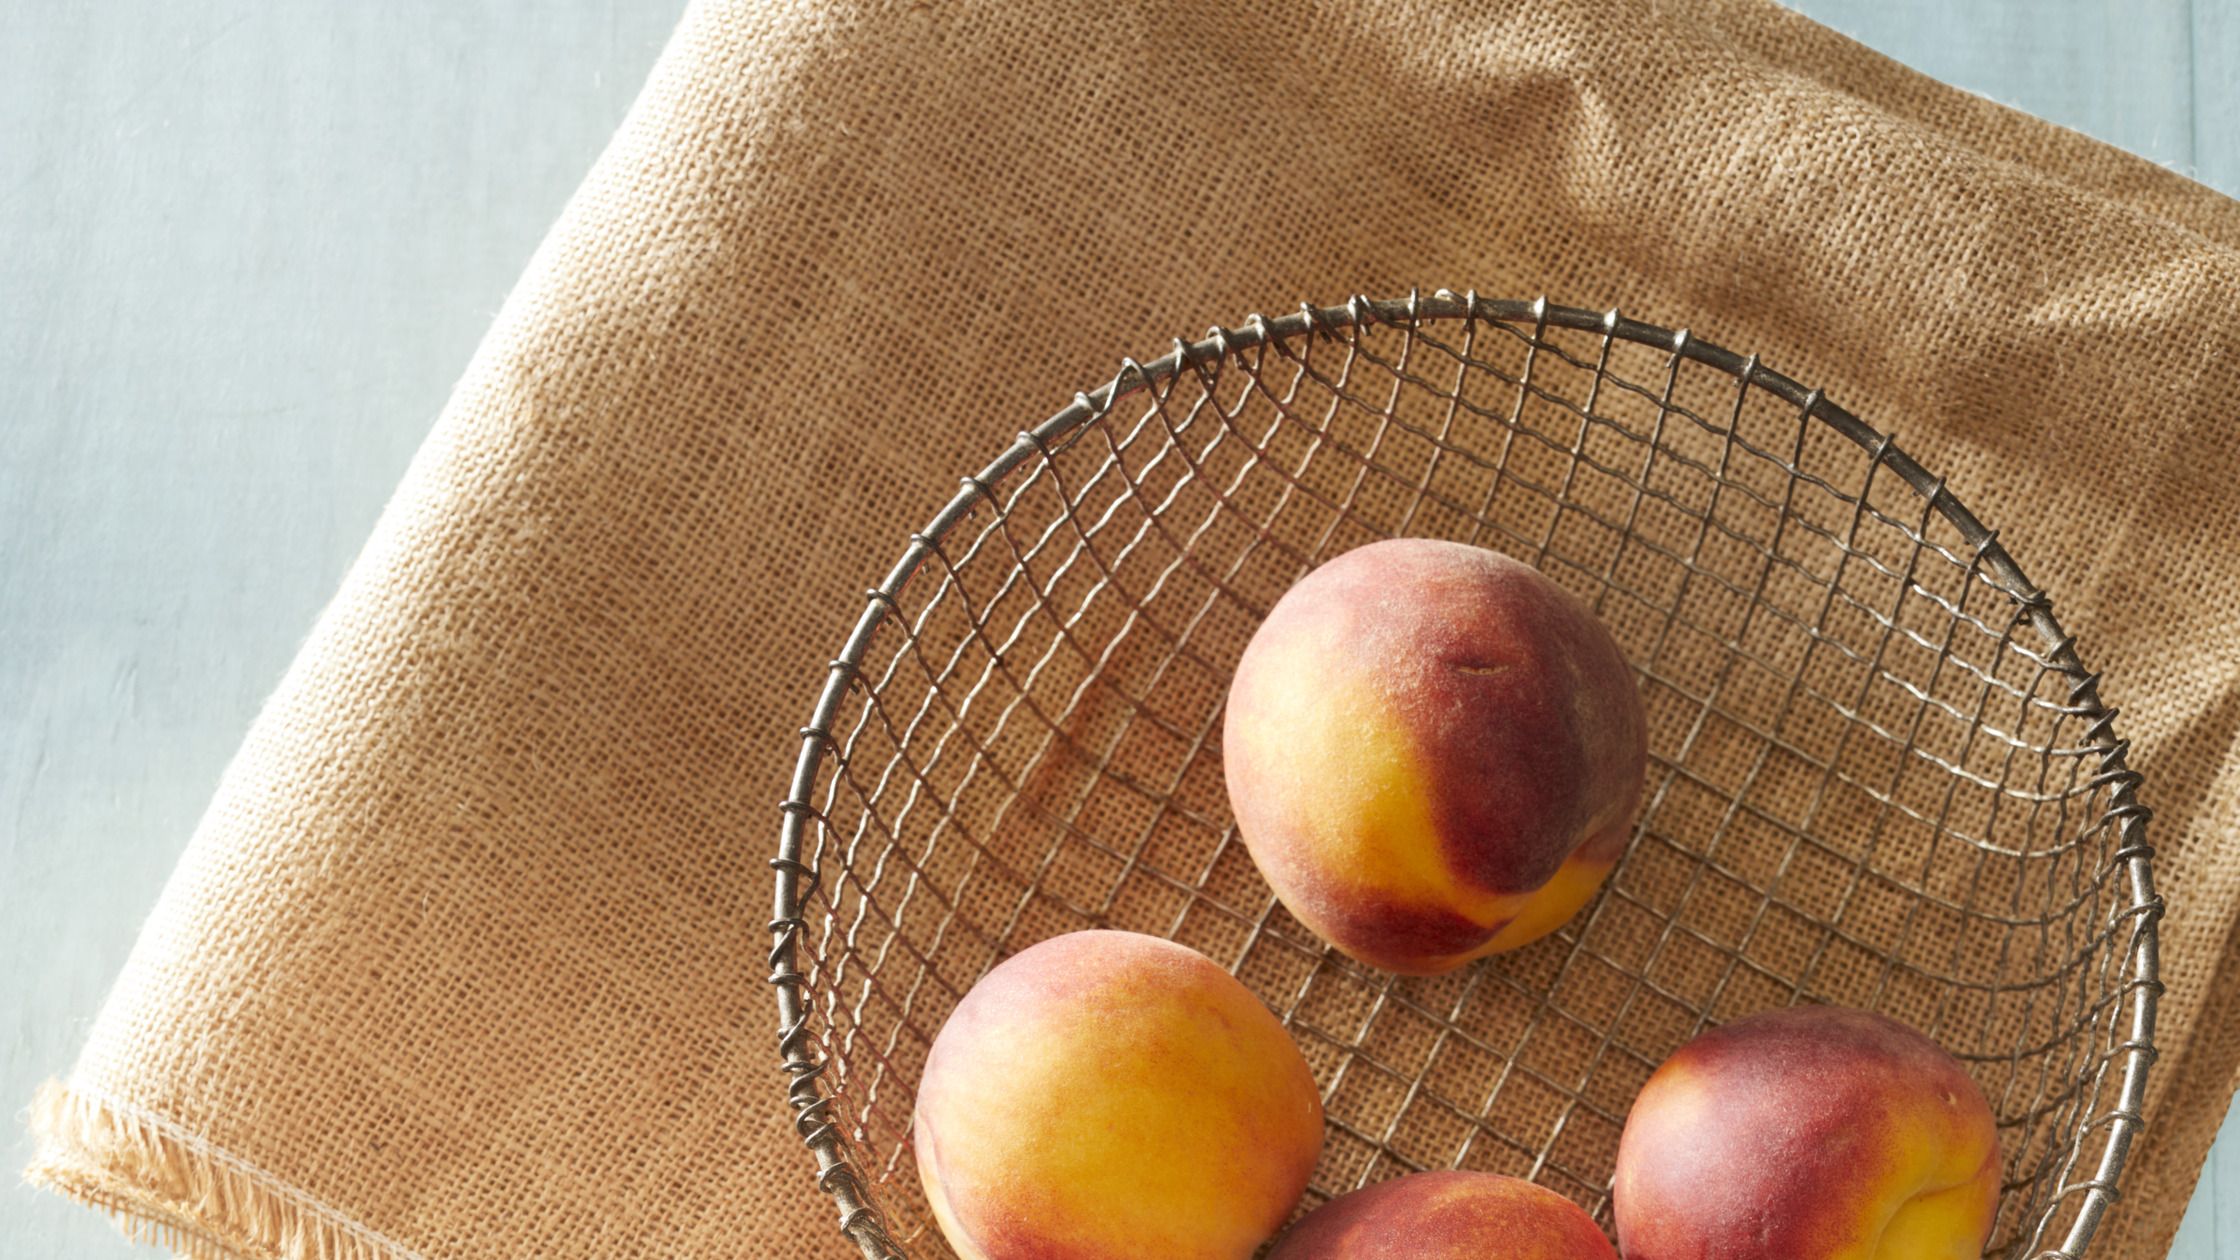 How To Freeze Peaches - Savoring The Good®